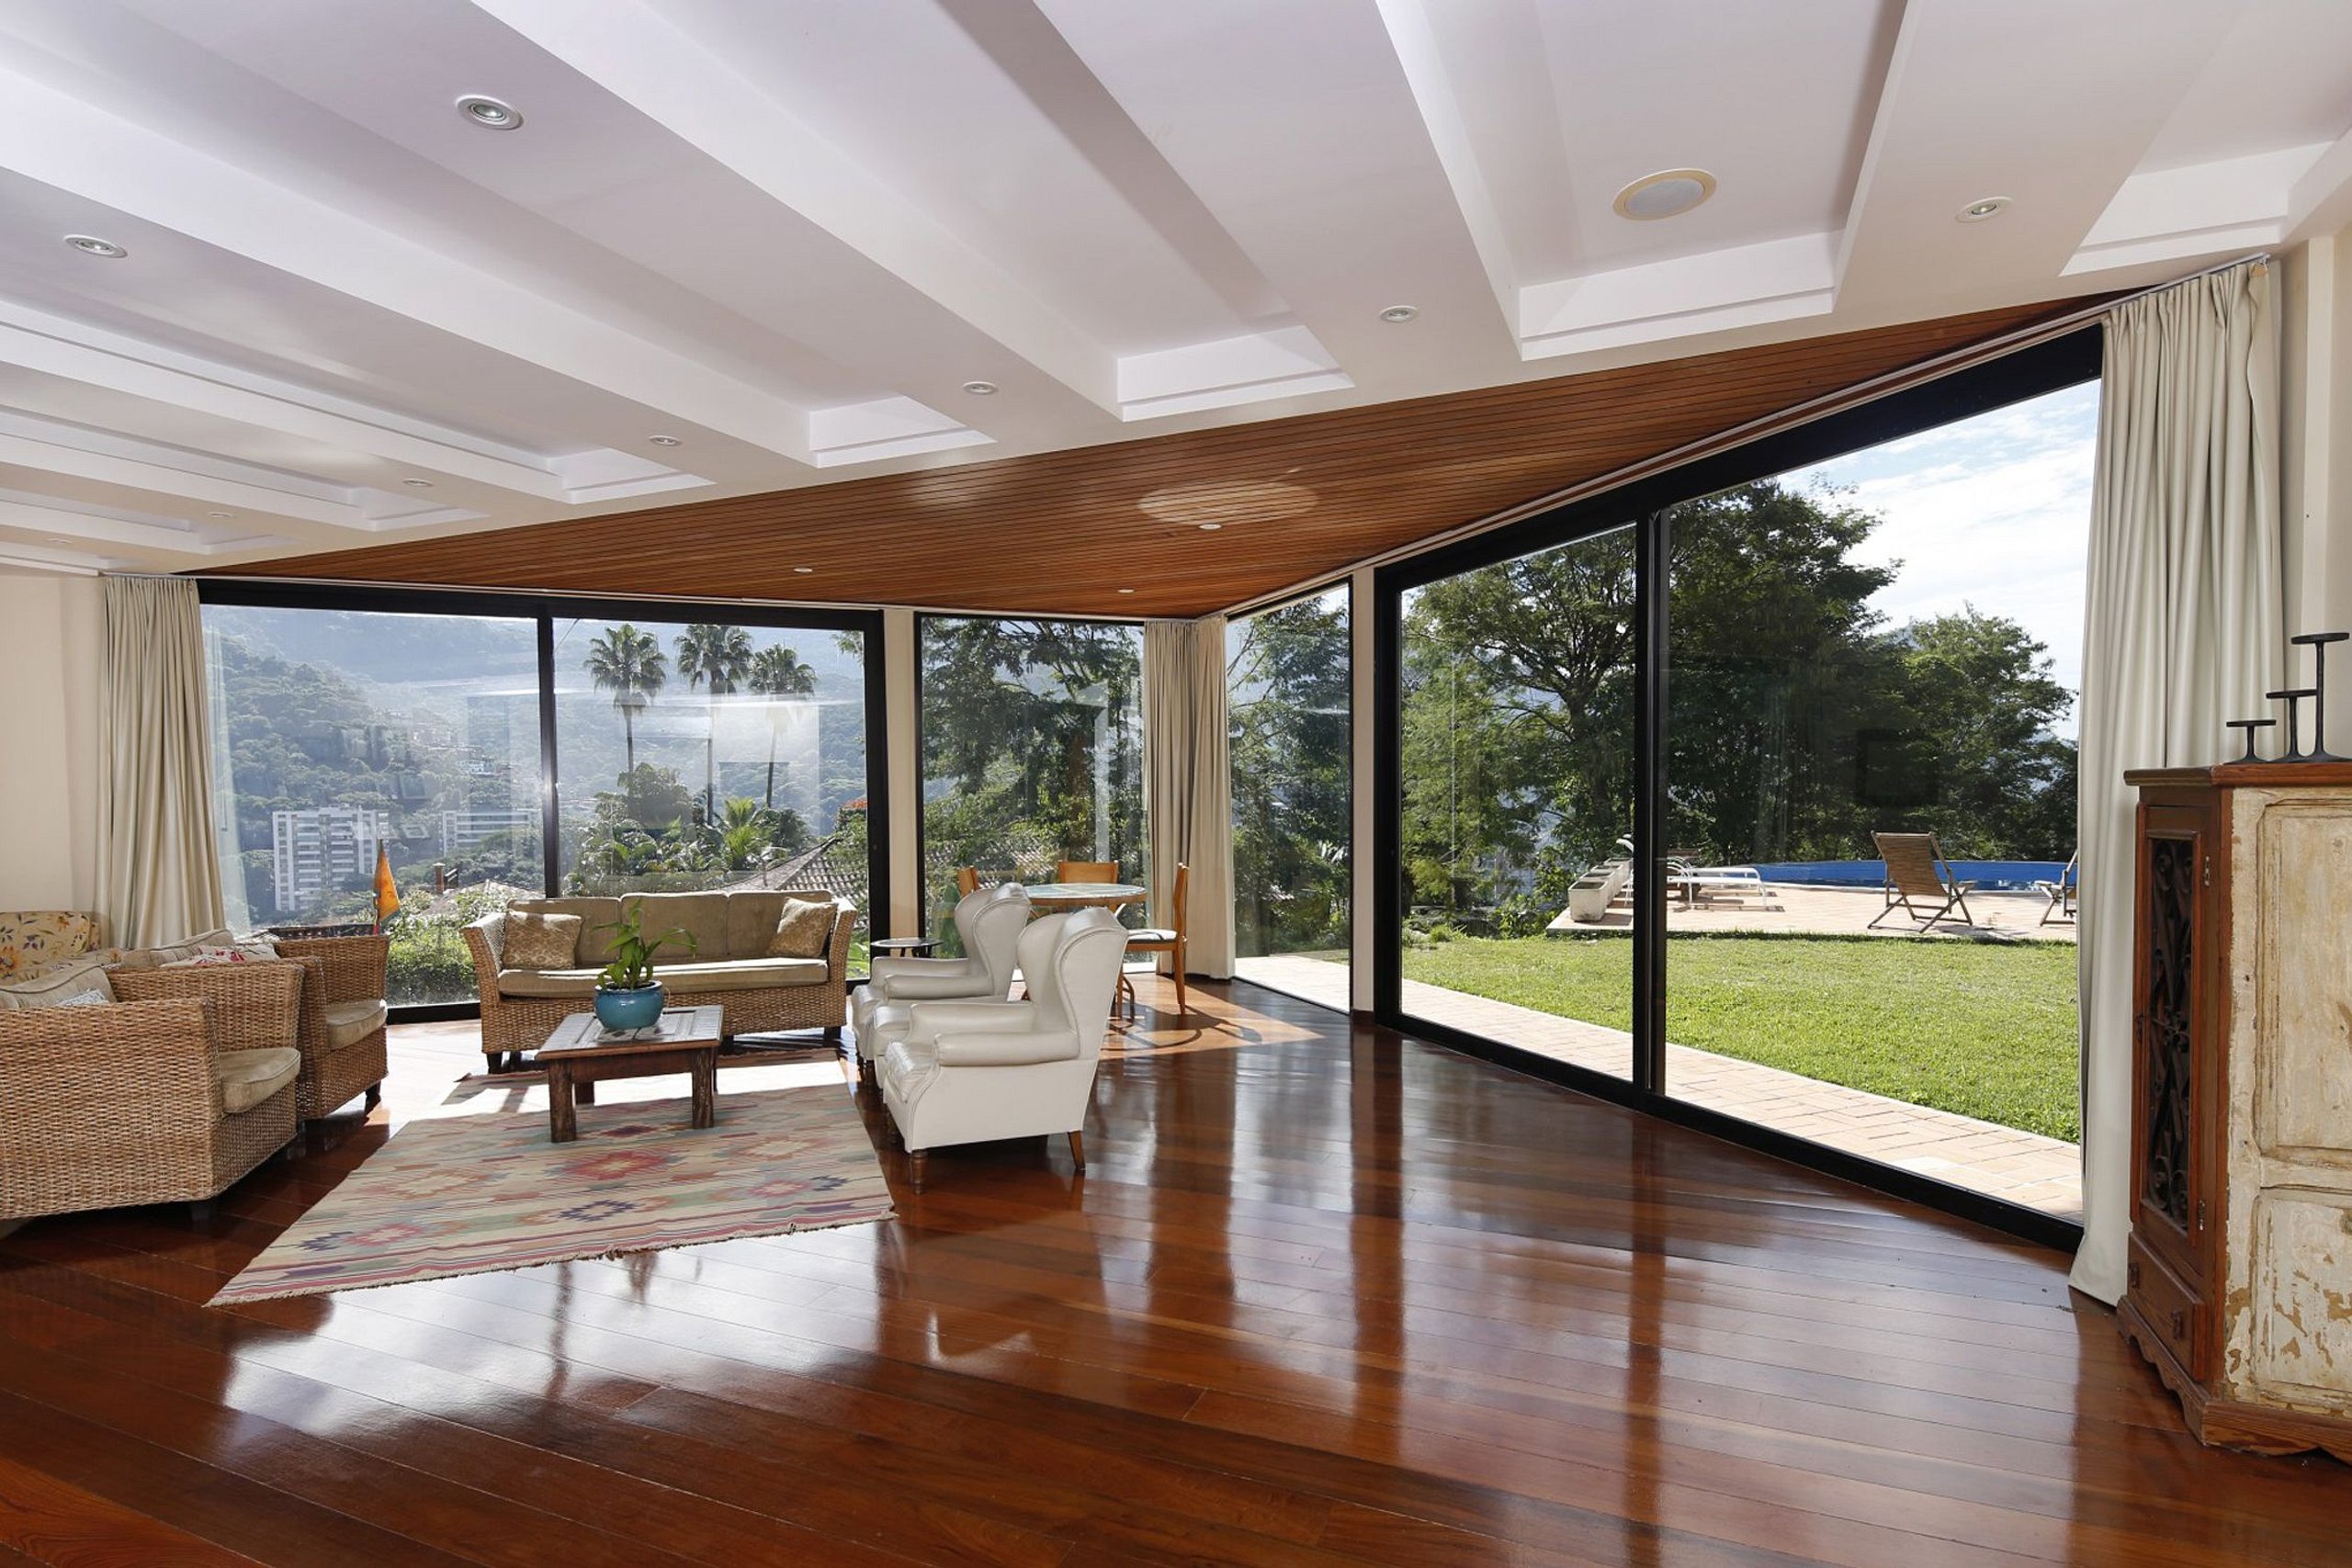 Property Image 2 - Large villa with great open views over Rio de Janeiro